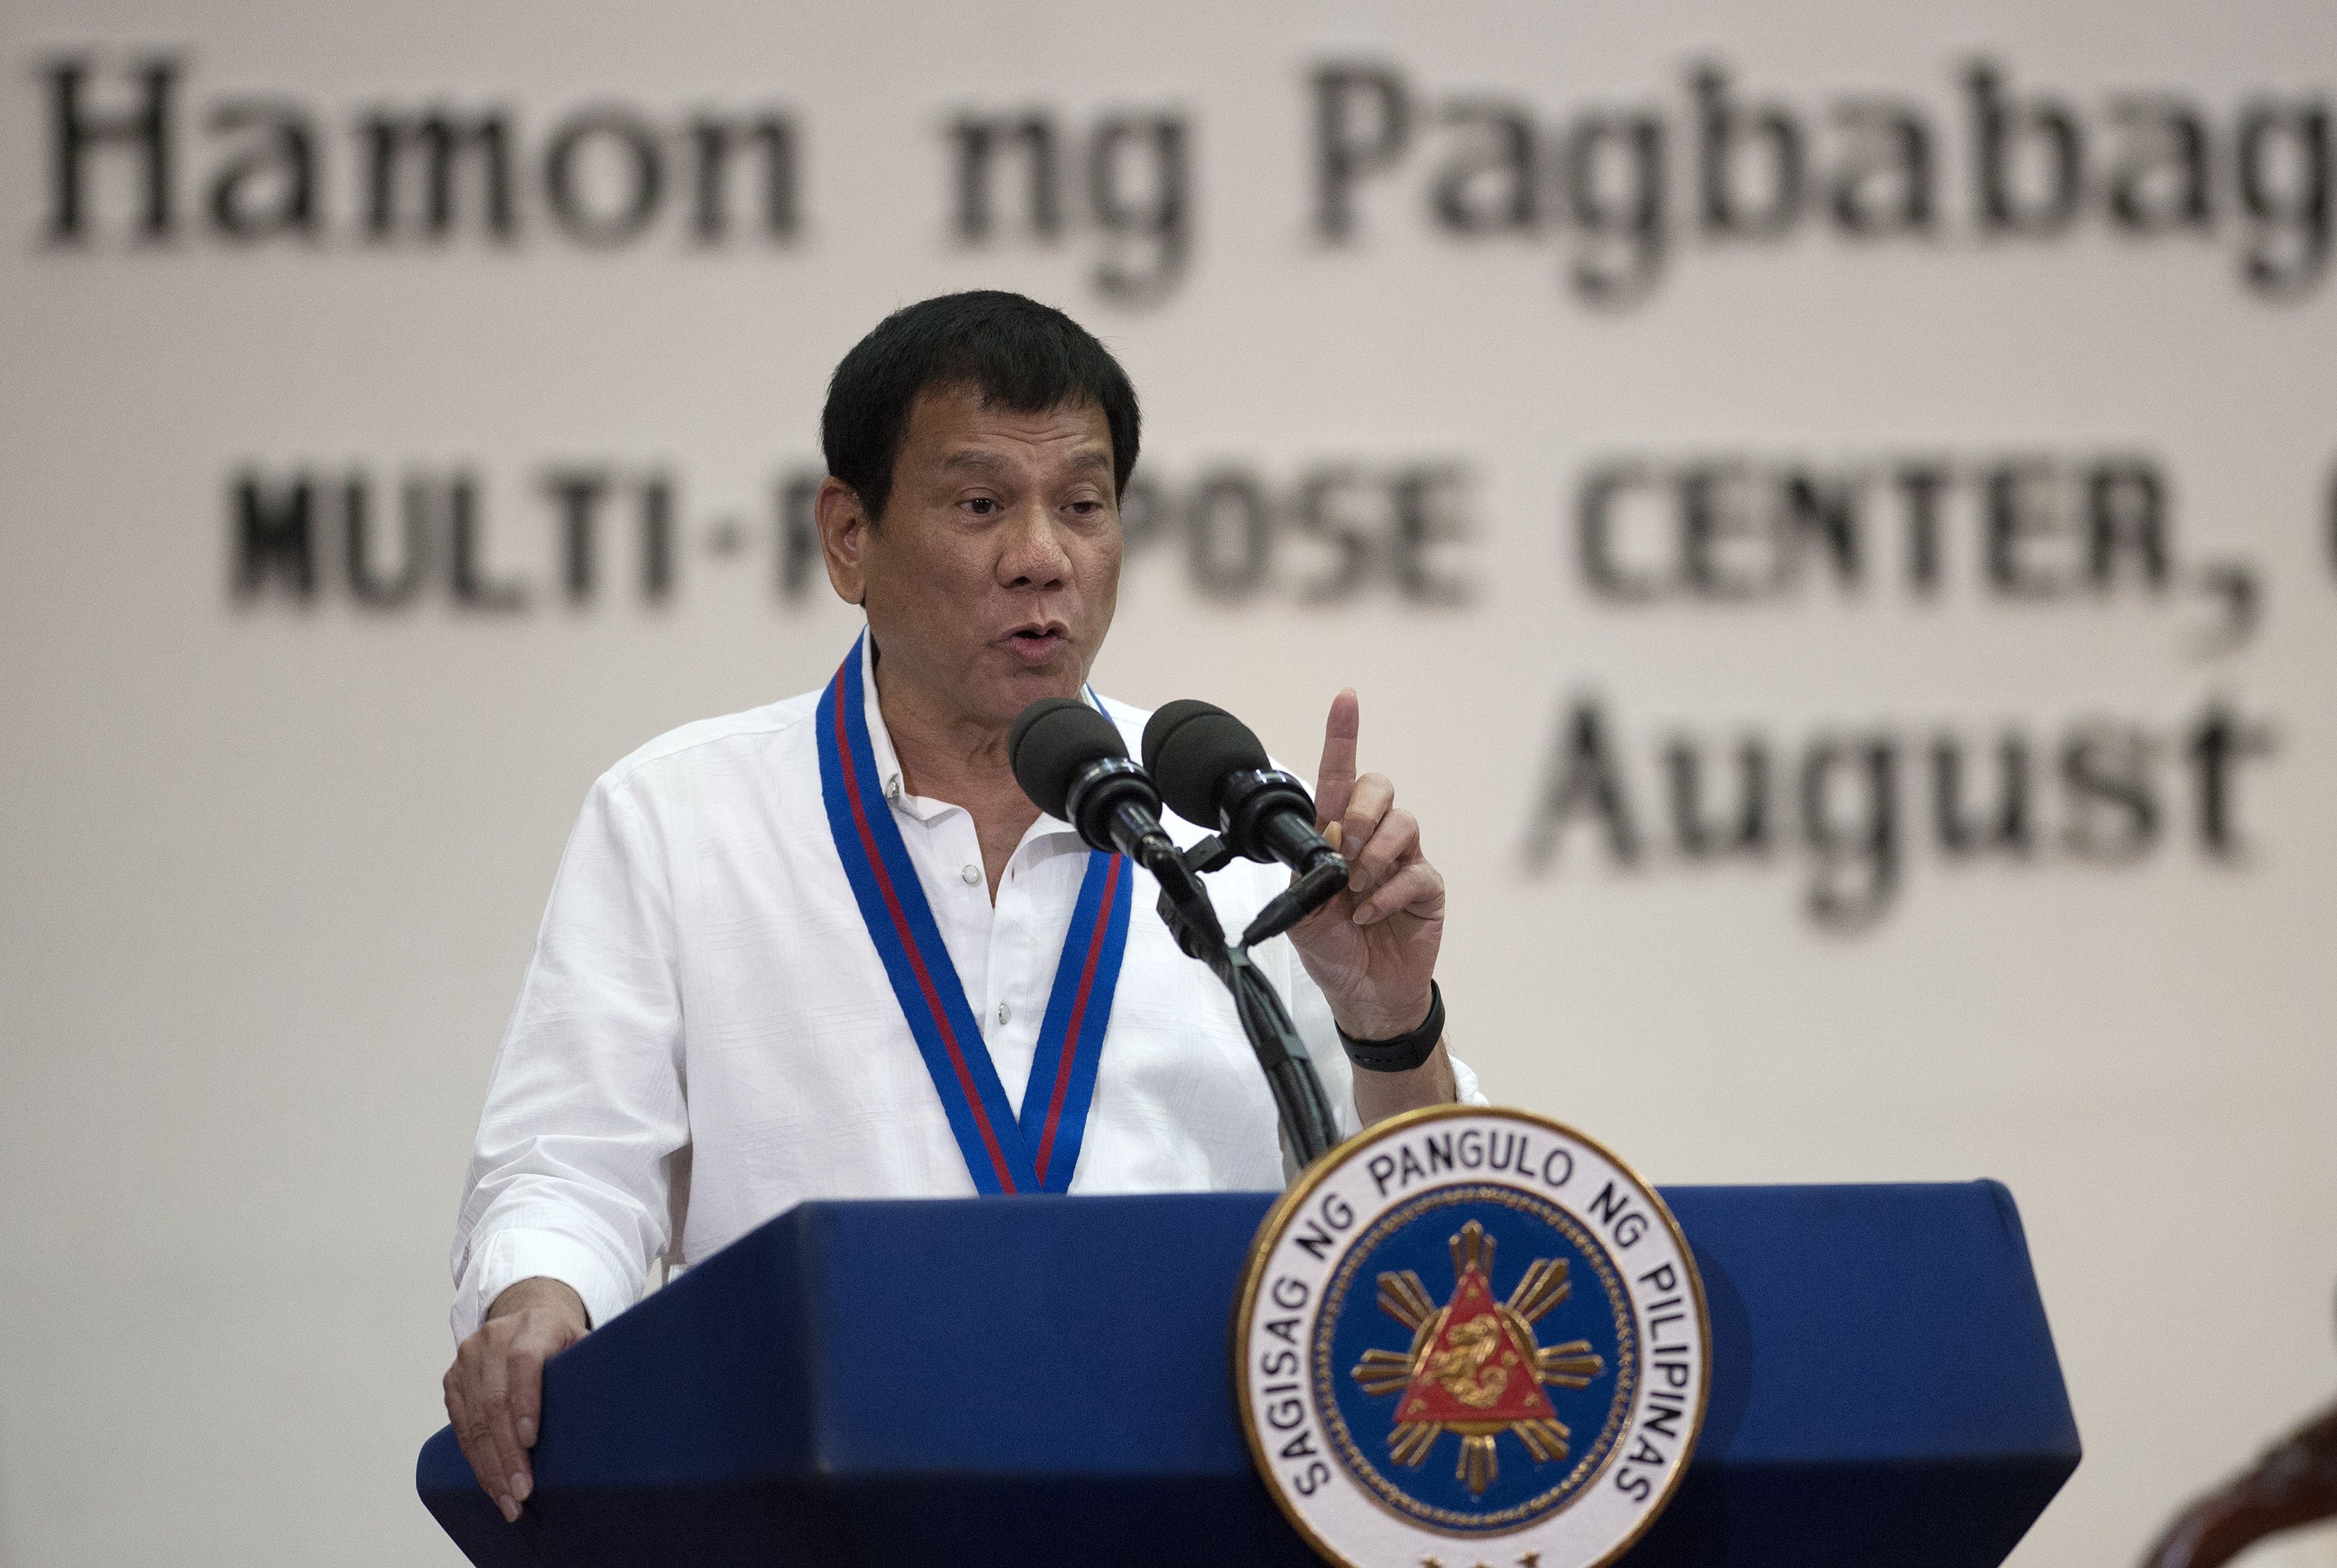 Philippine President Rodrigo Duterte gestures as he talks during the 115th police-service anniversary at the Philippine National Police headquarters in Manila on Aug. 17, 2016 (Noel Celis—AFP/Getty Images)